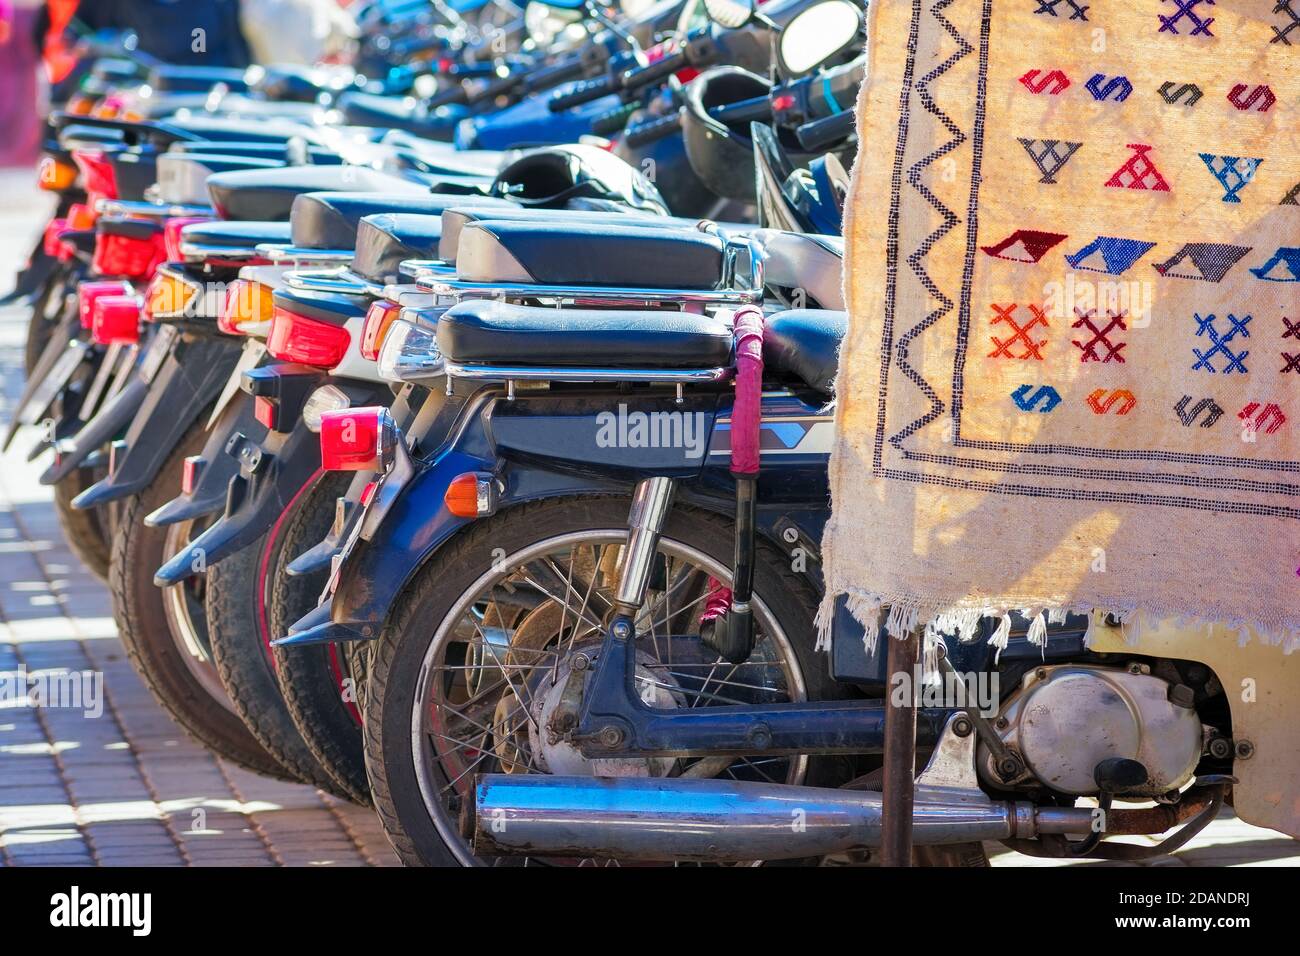 Row of motorcycles in Marrakech, Morocco. Stock Photo